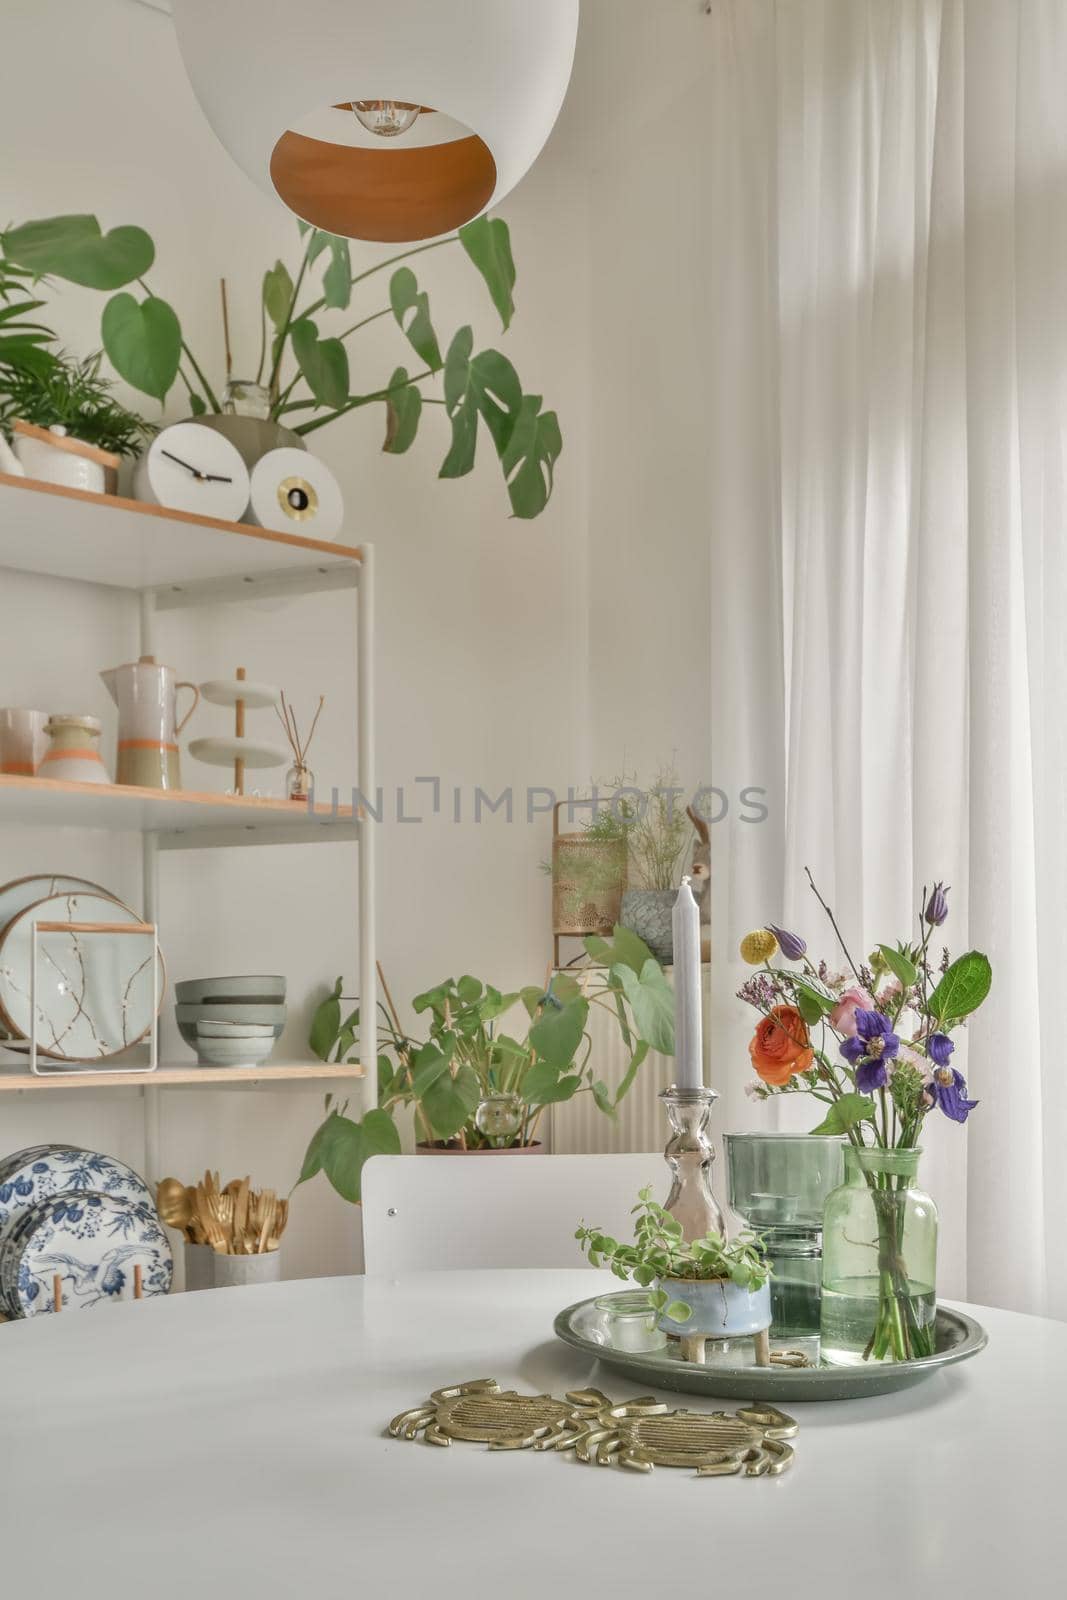 Home decoration using flowers, dishes and souvenirs located on shelves and table